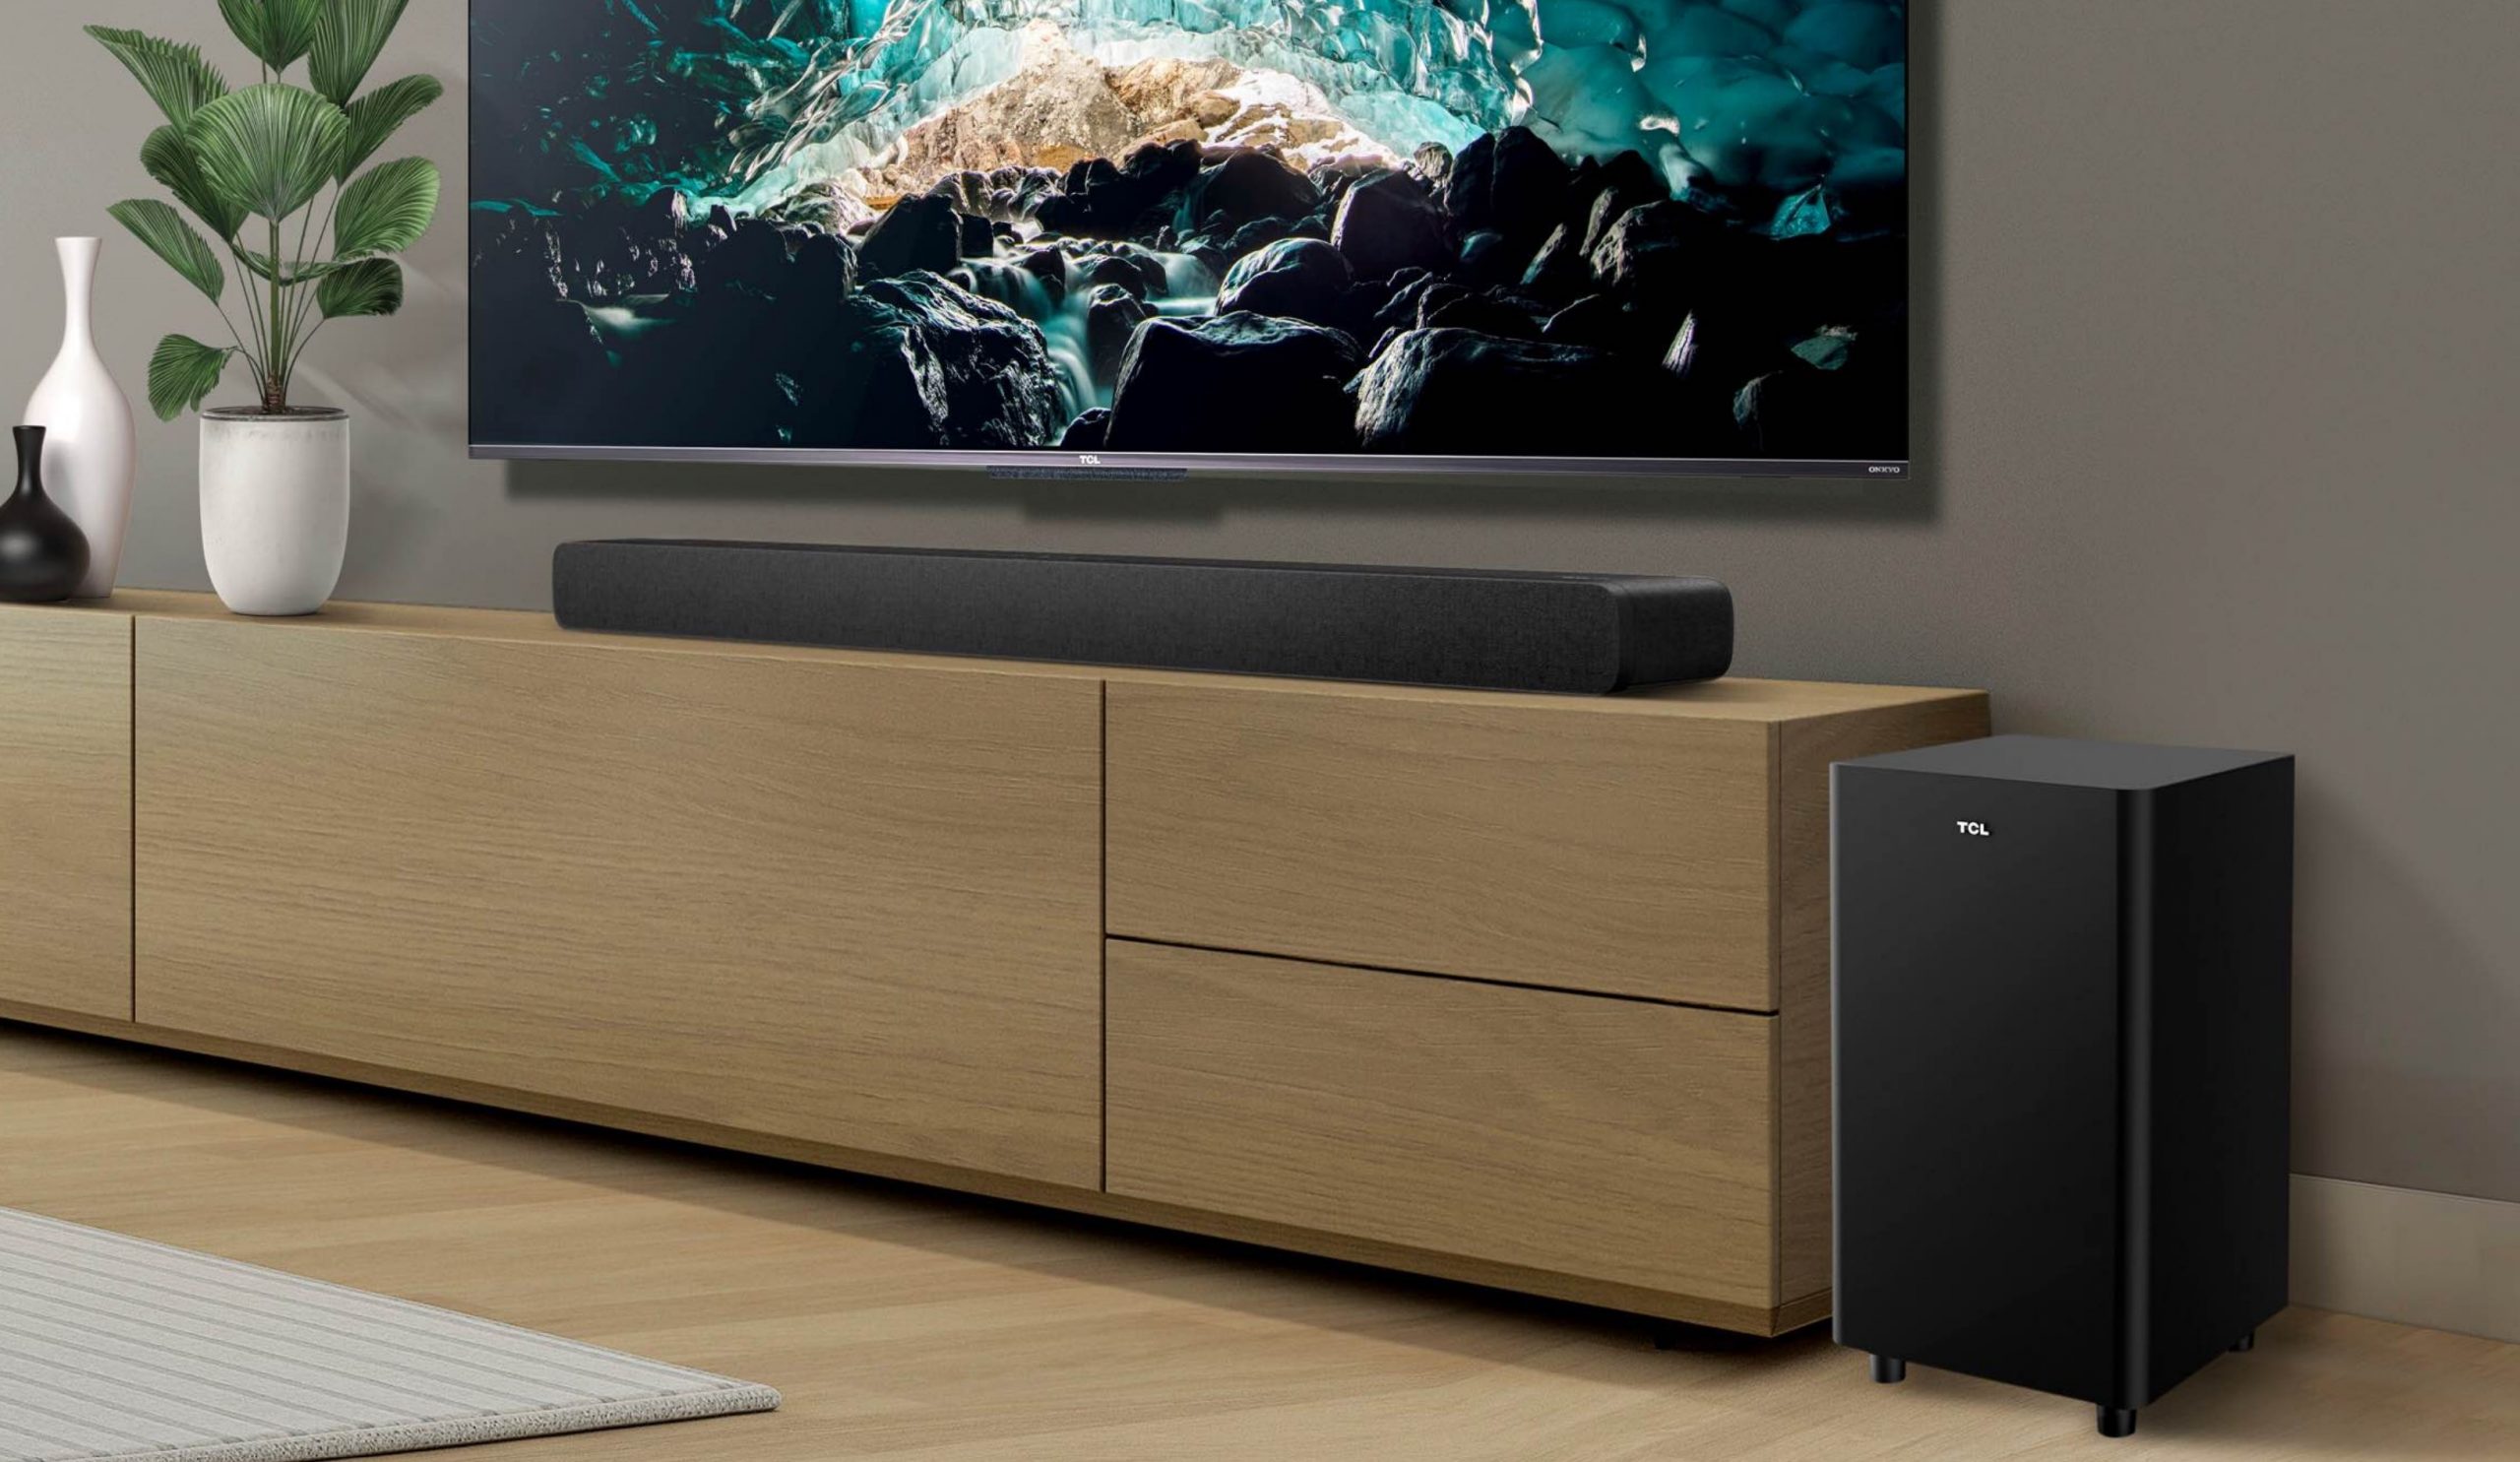 TCL TS8132 3.1.2 Dolby Atmos capable soundbar (review)